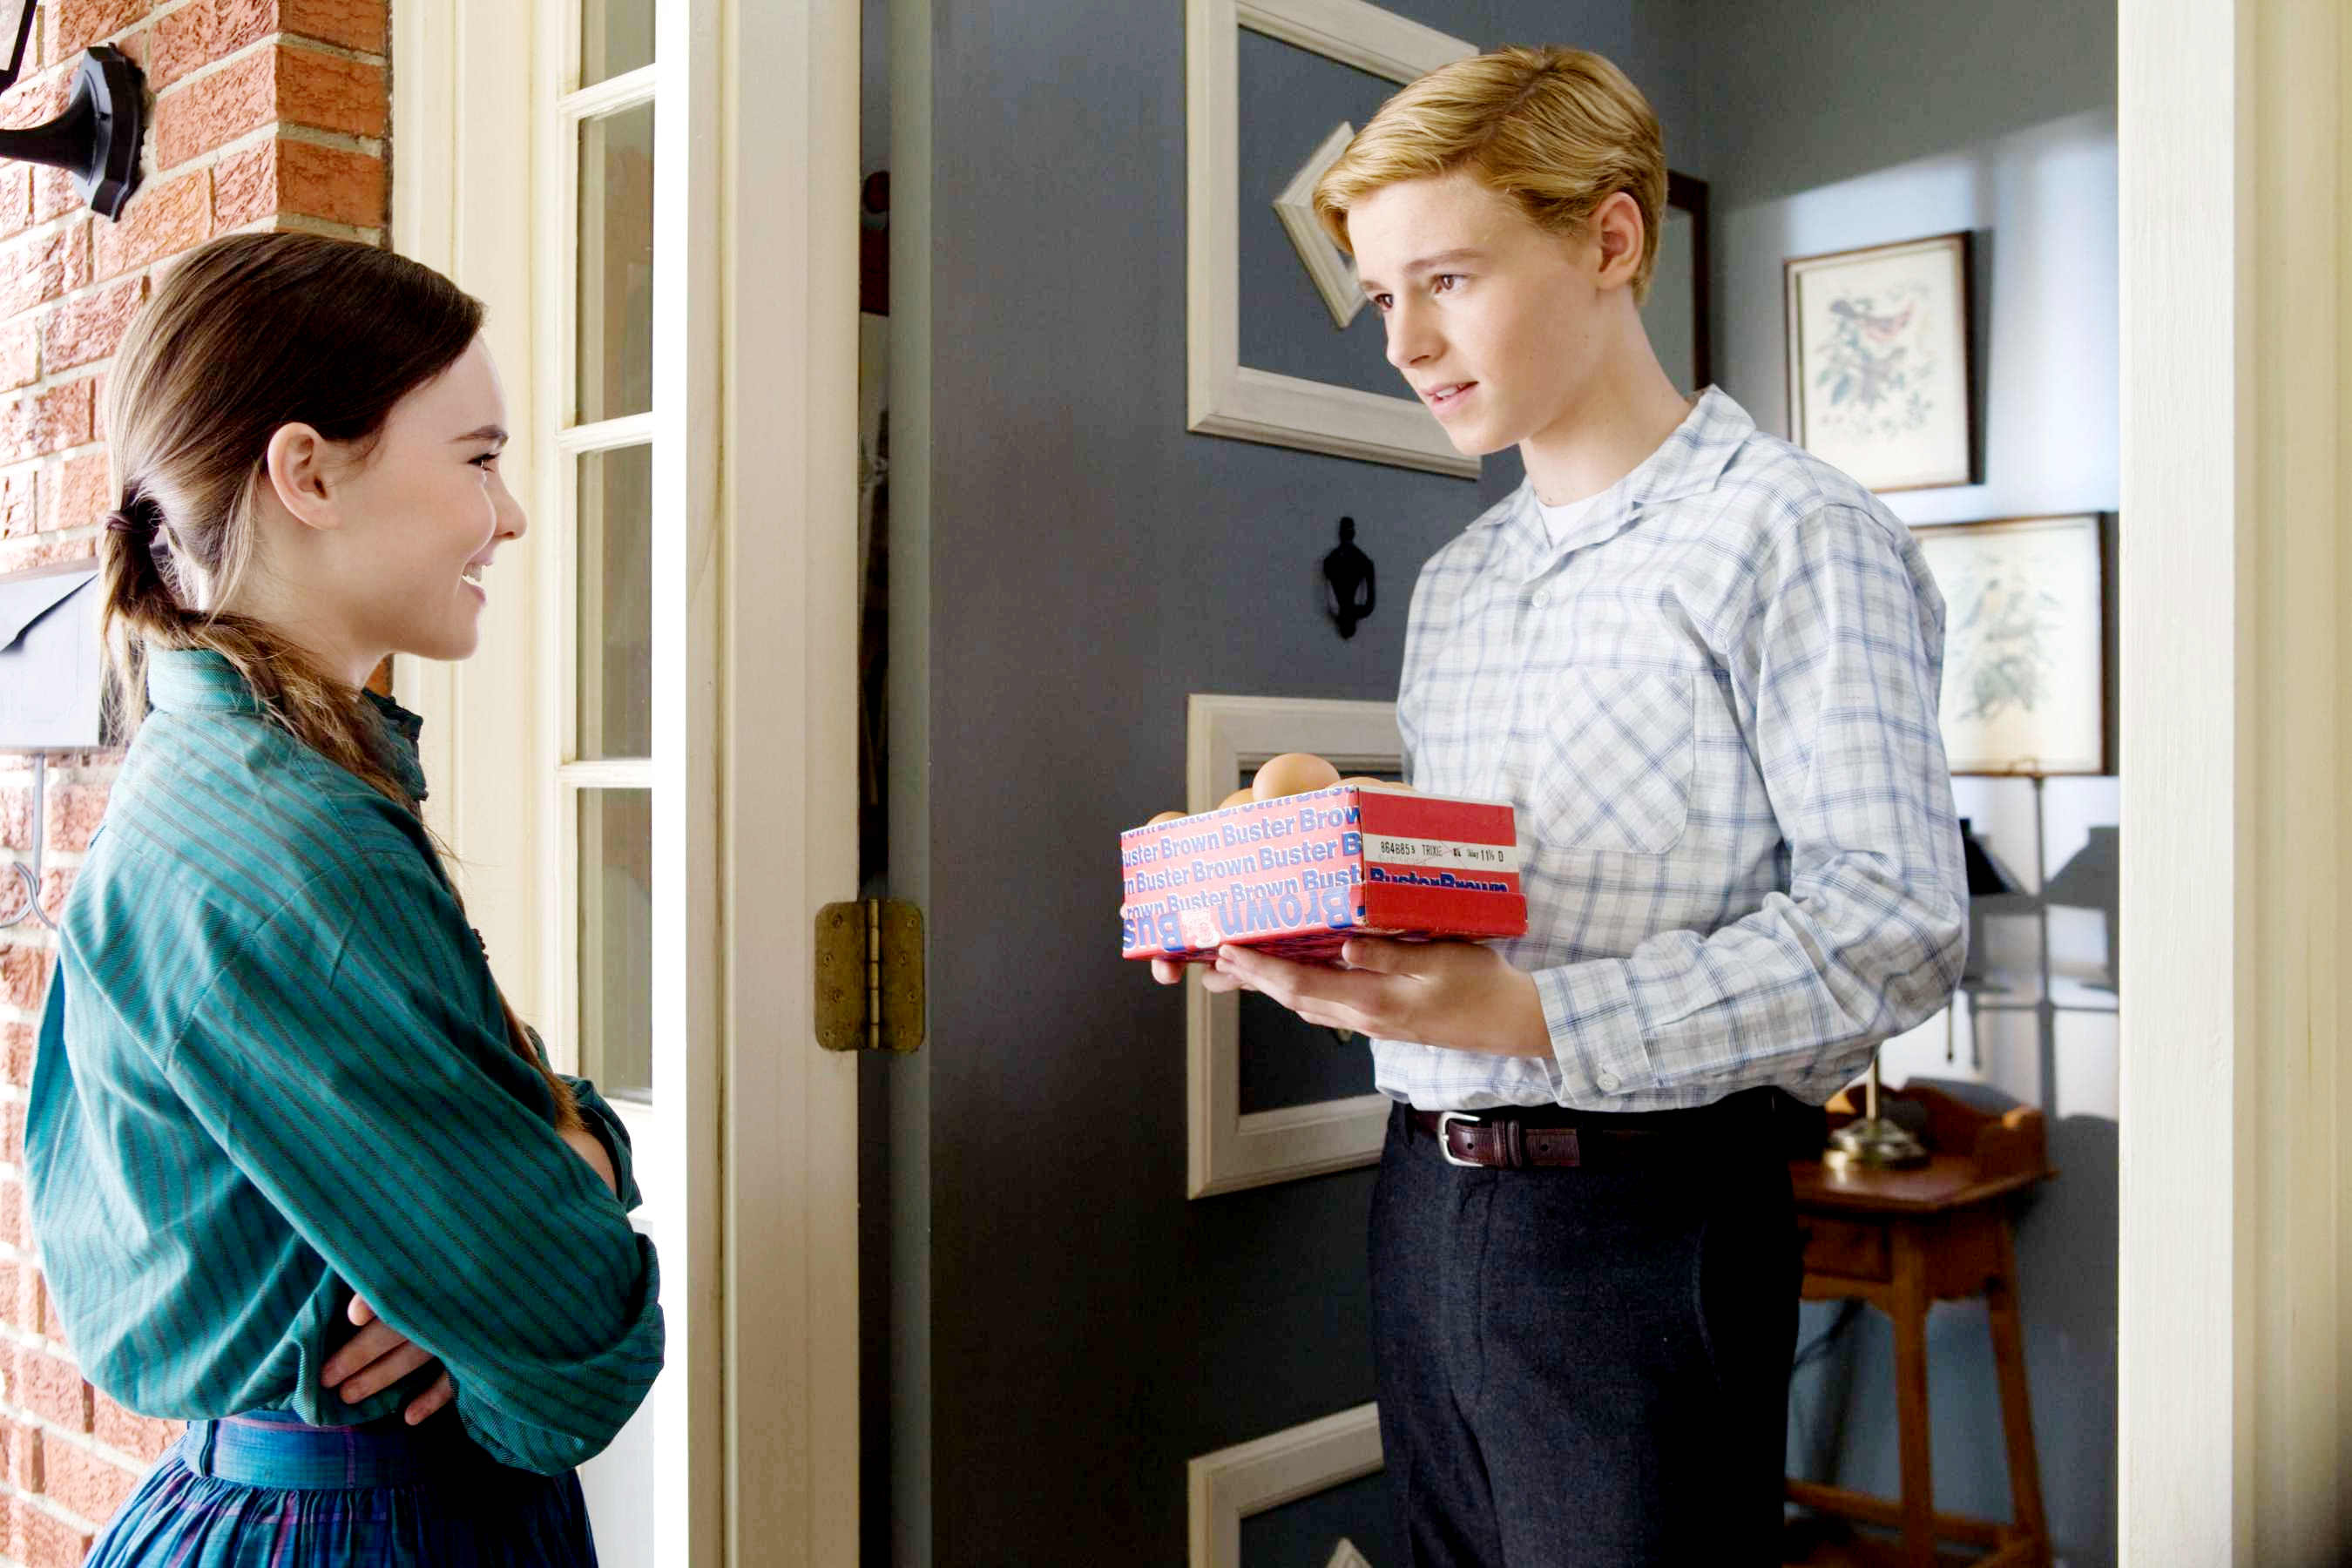 Madeline Carroll stars as Juli and Callan McAuliffe stars as Bryce in Warner Bros. Pictures' Flipped (2010). Photo credit by Ben Glass.